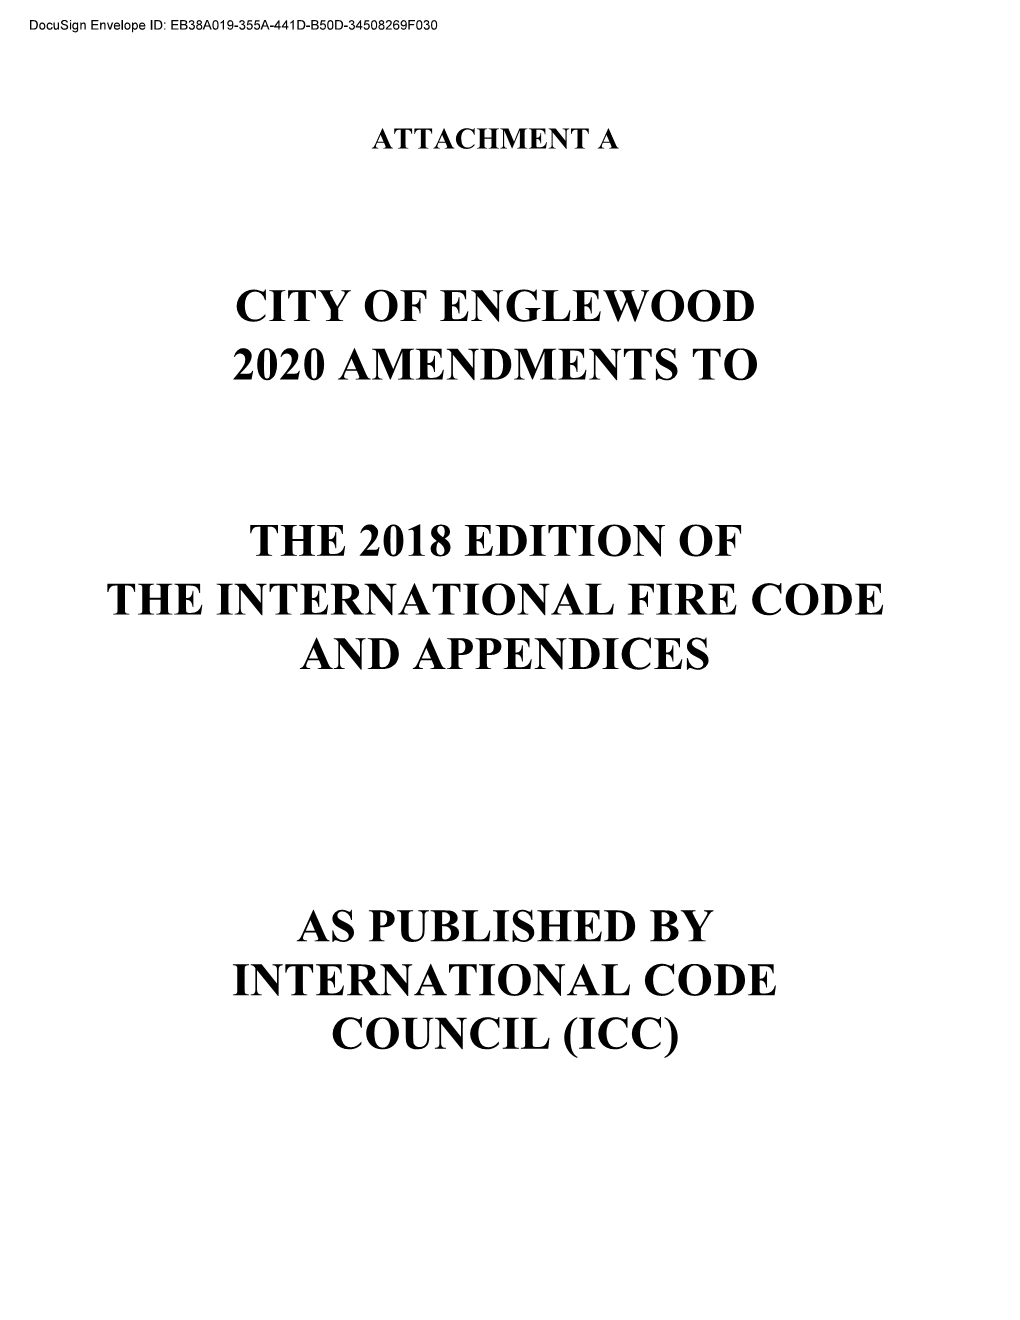 City of Englewood 2020 Amendments to the 2018